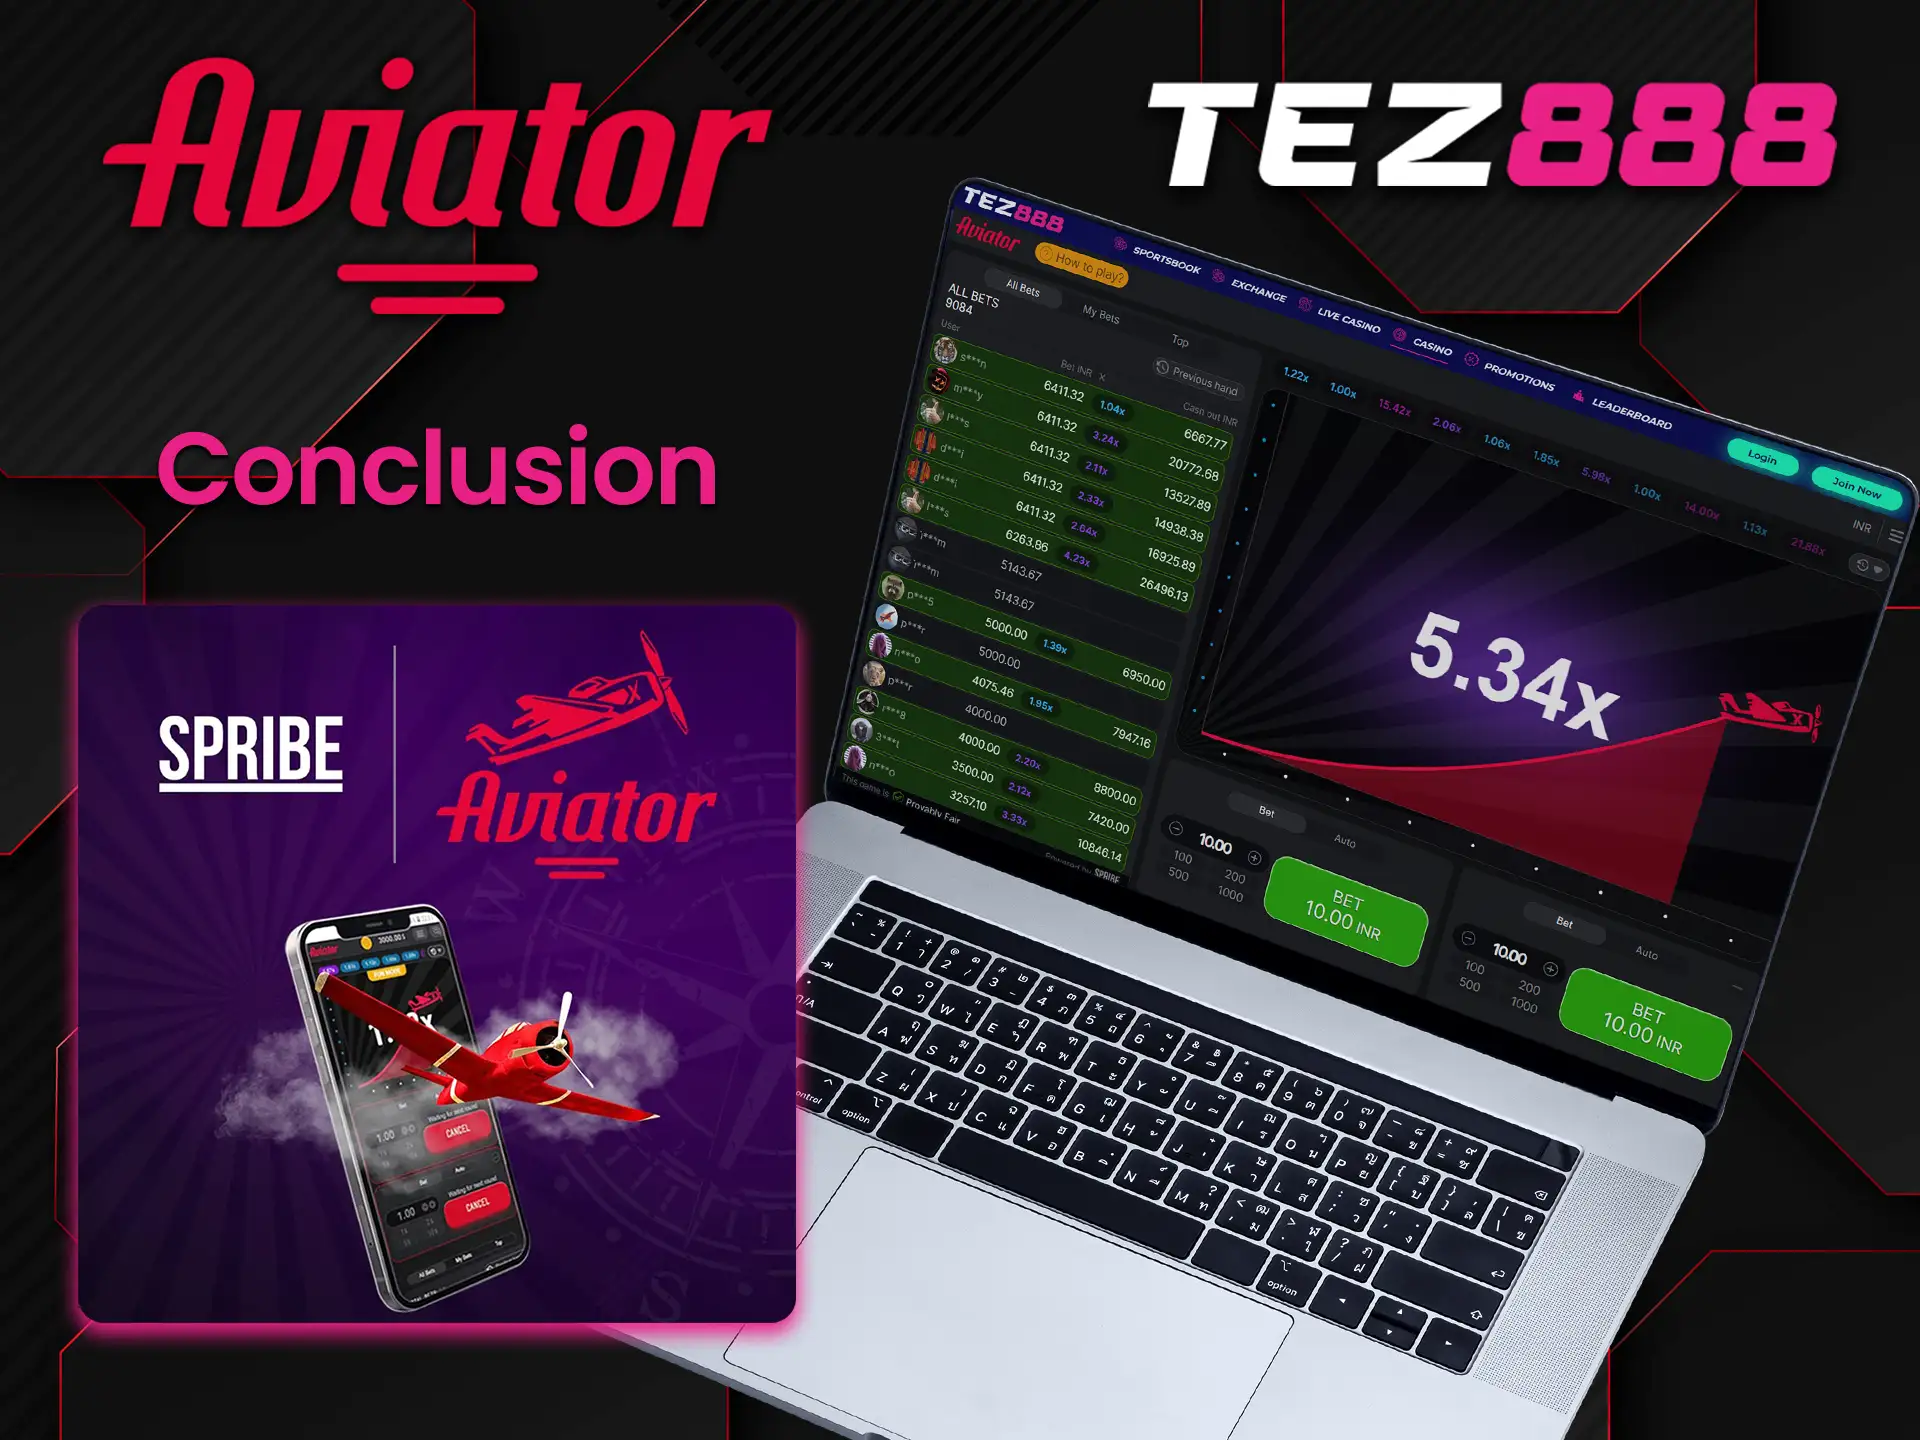 We recommend the Tez888 gaming platform to win at Aviator.